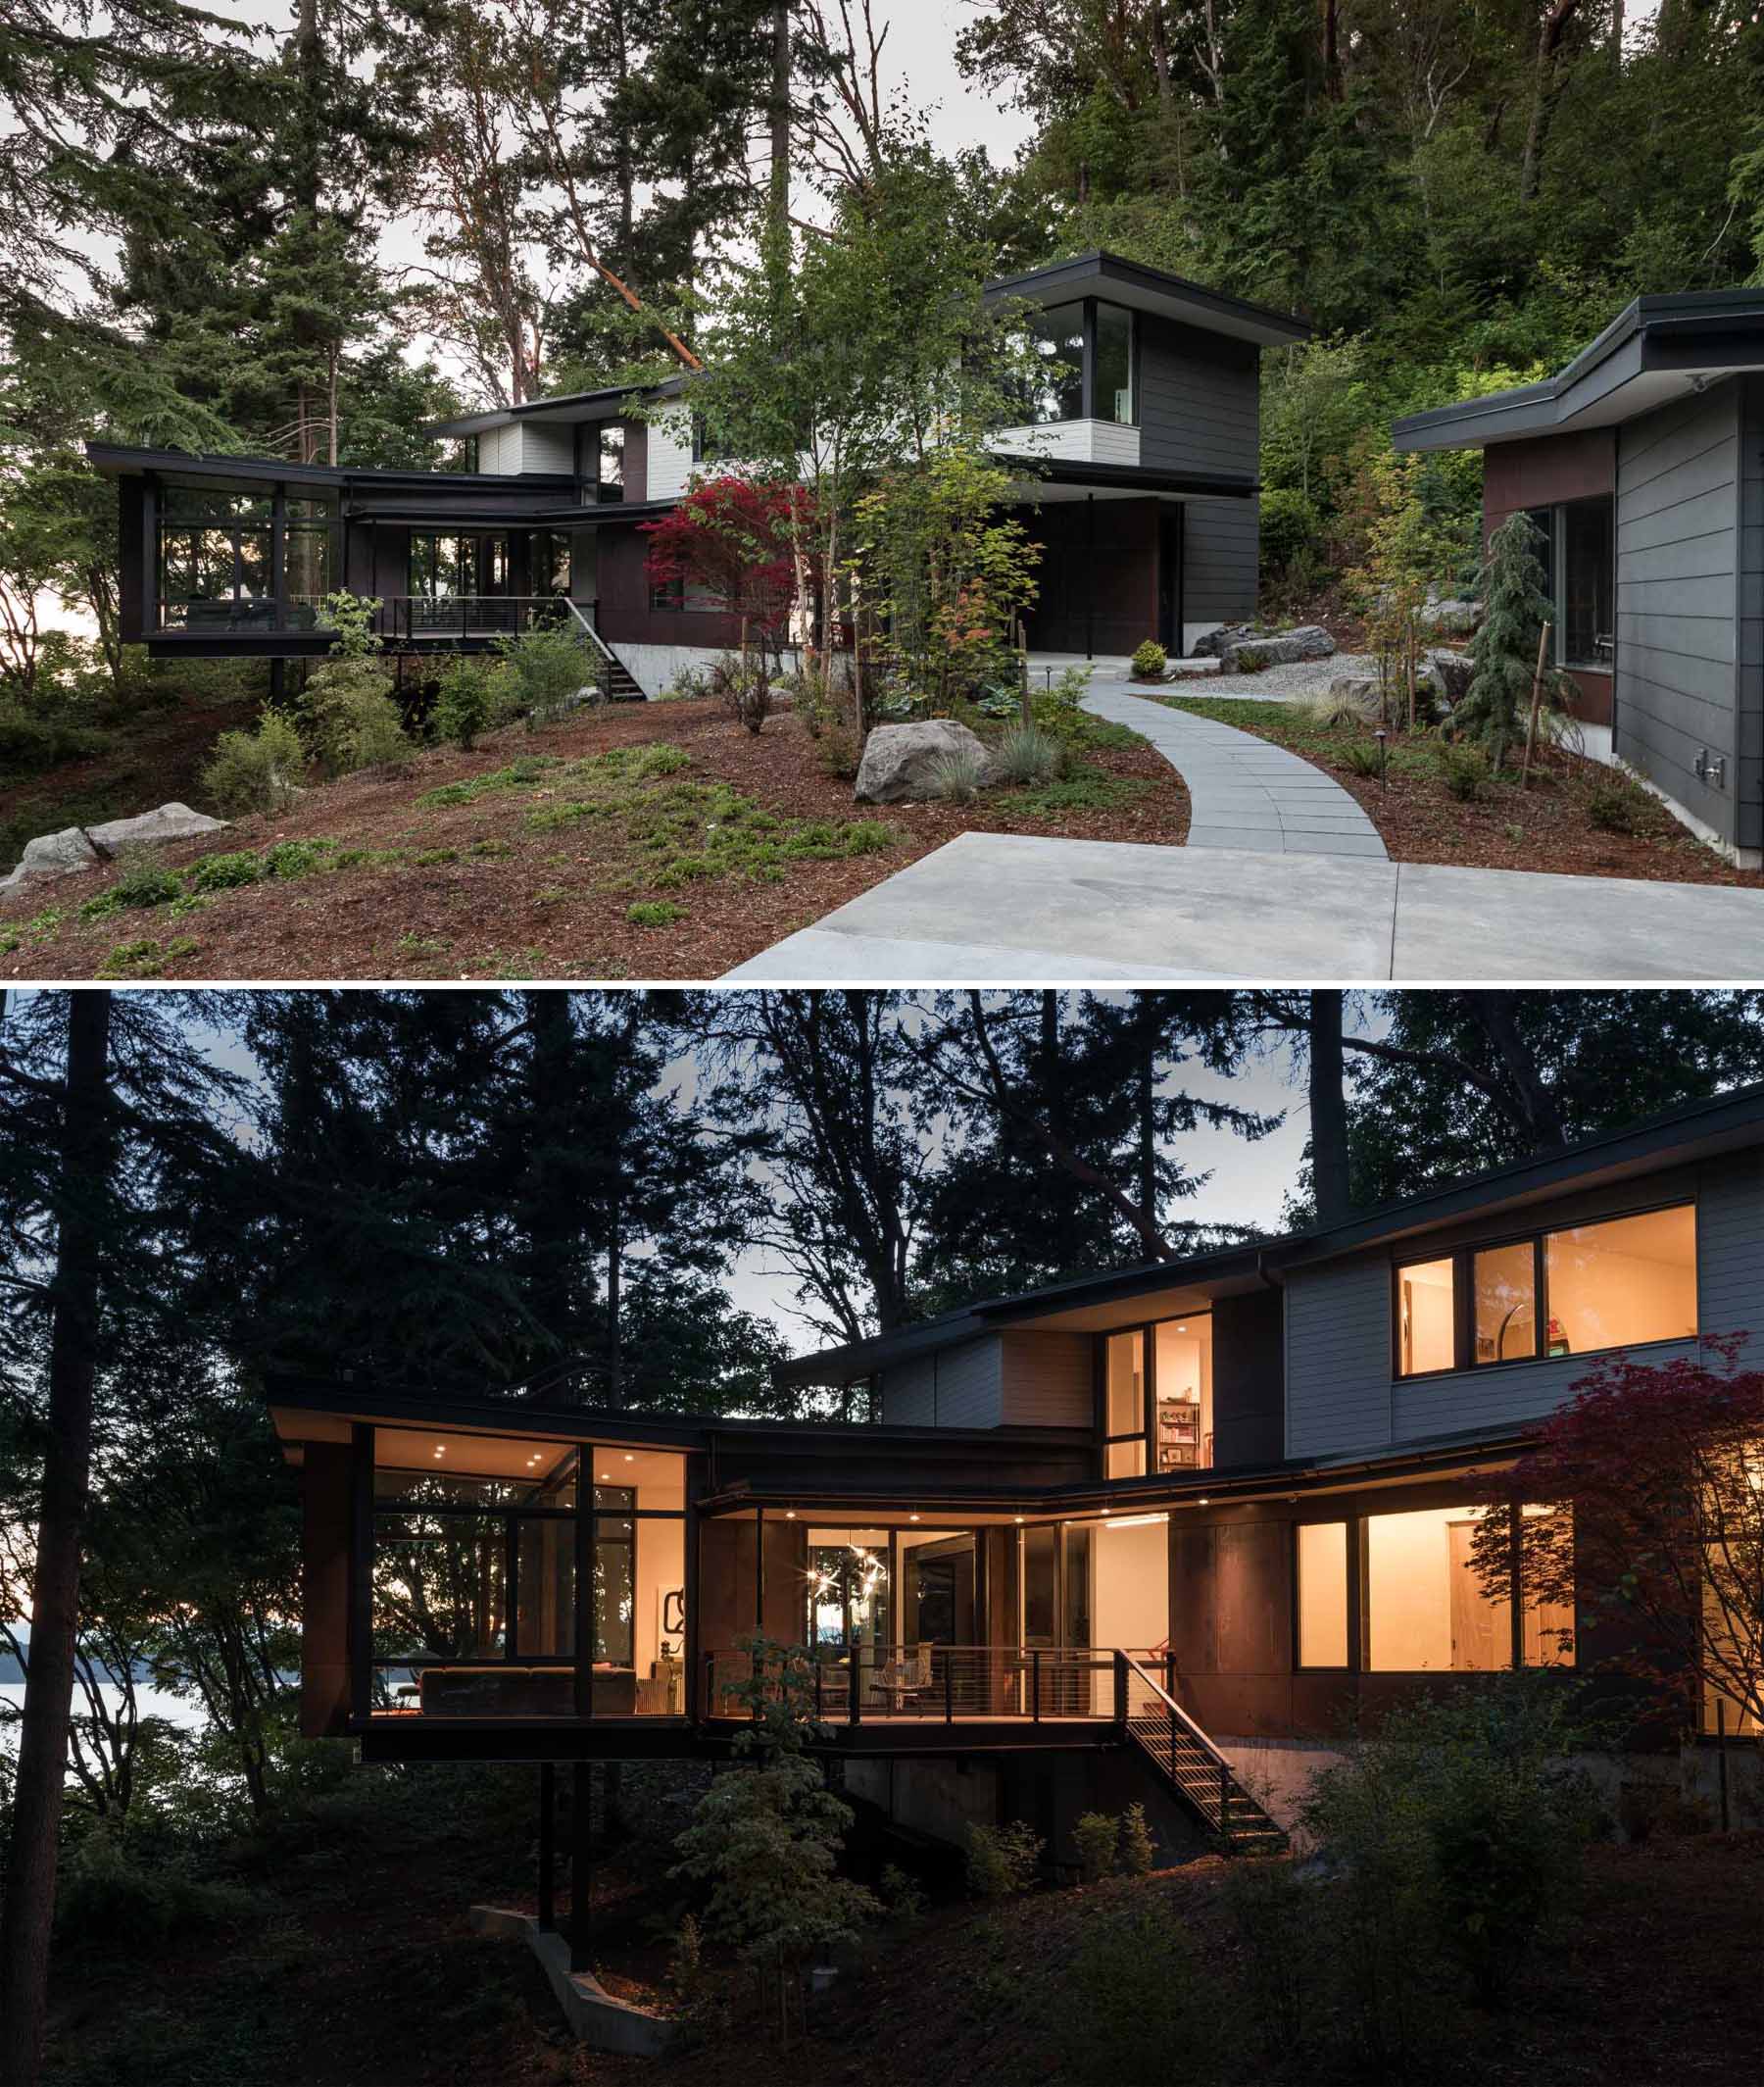 DeForest Architects has shared photos of a home they designed that follows the topography of the site, with some rooms tucked into the land and others floating above it.